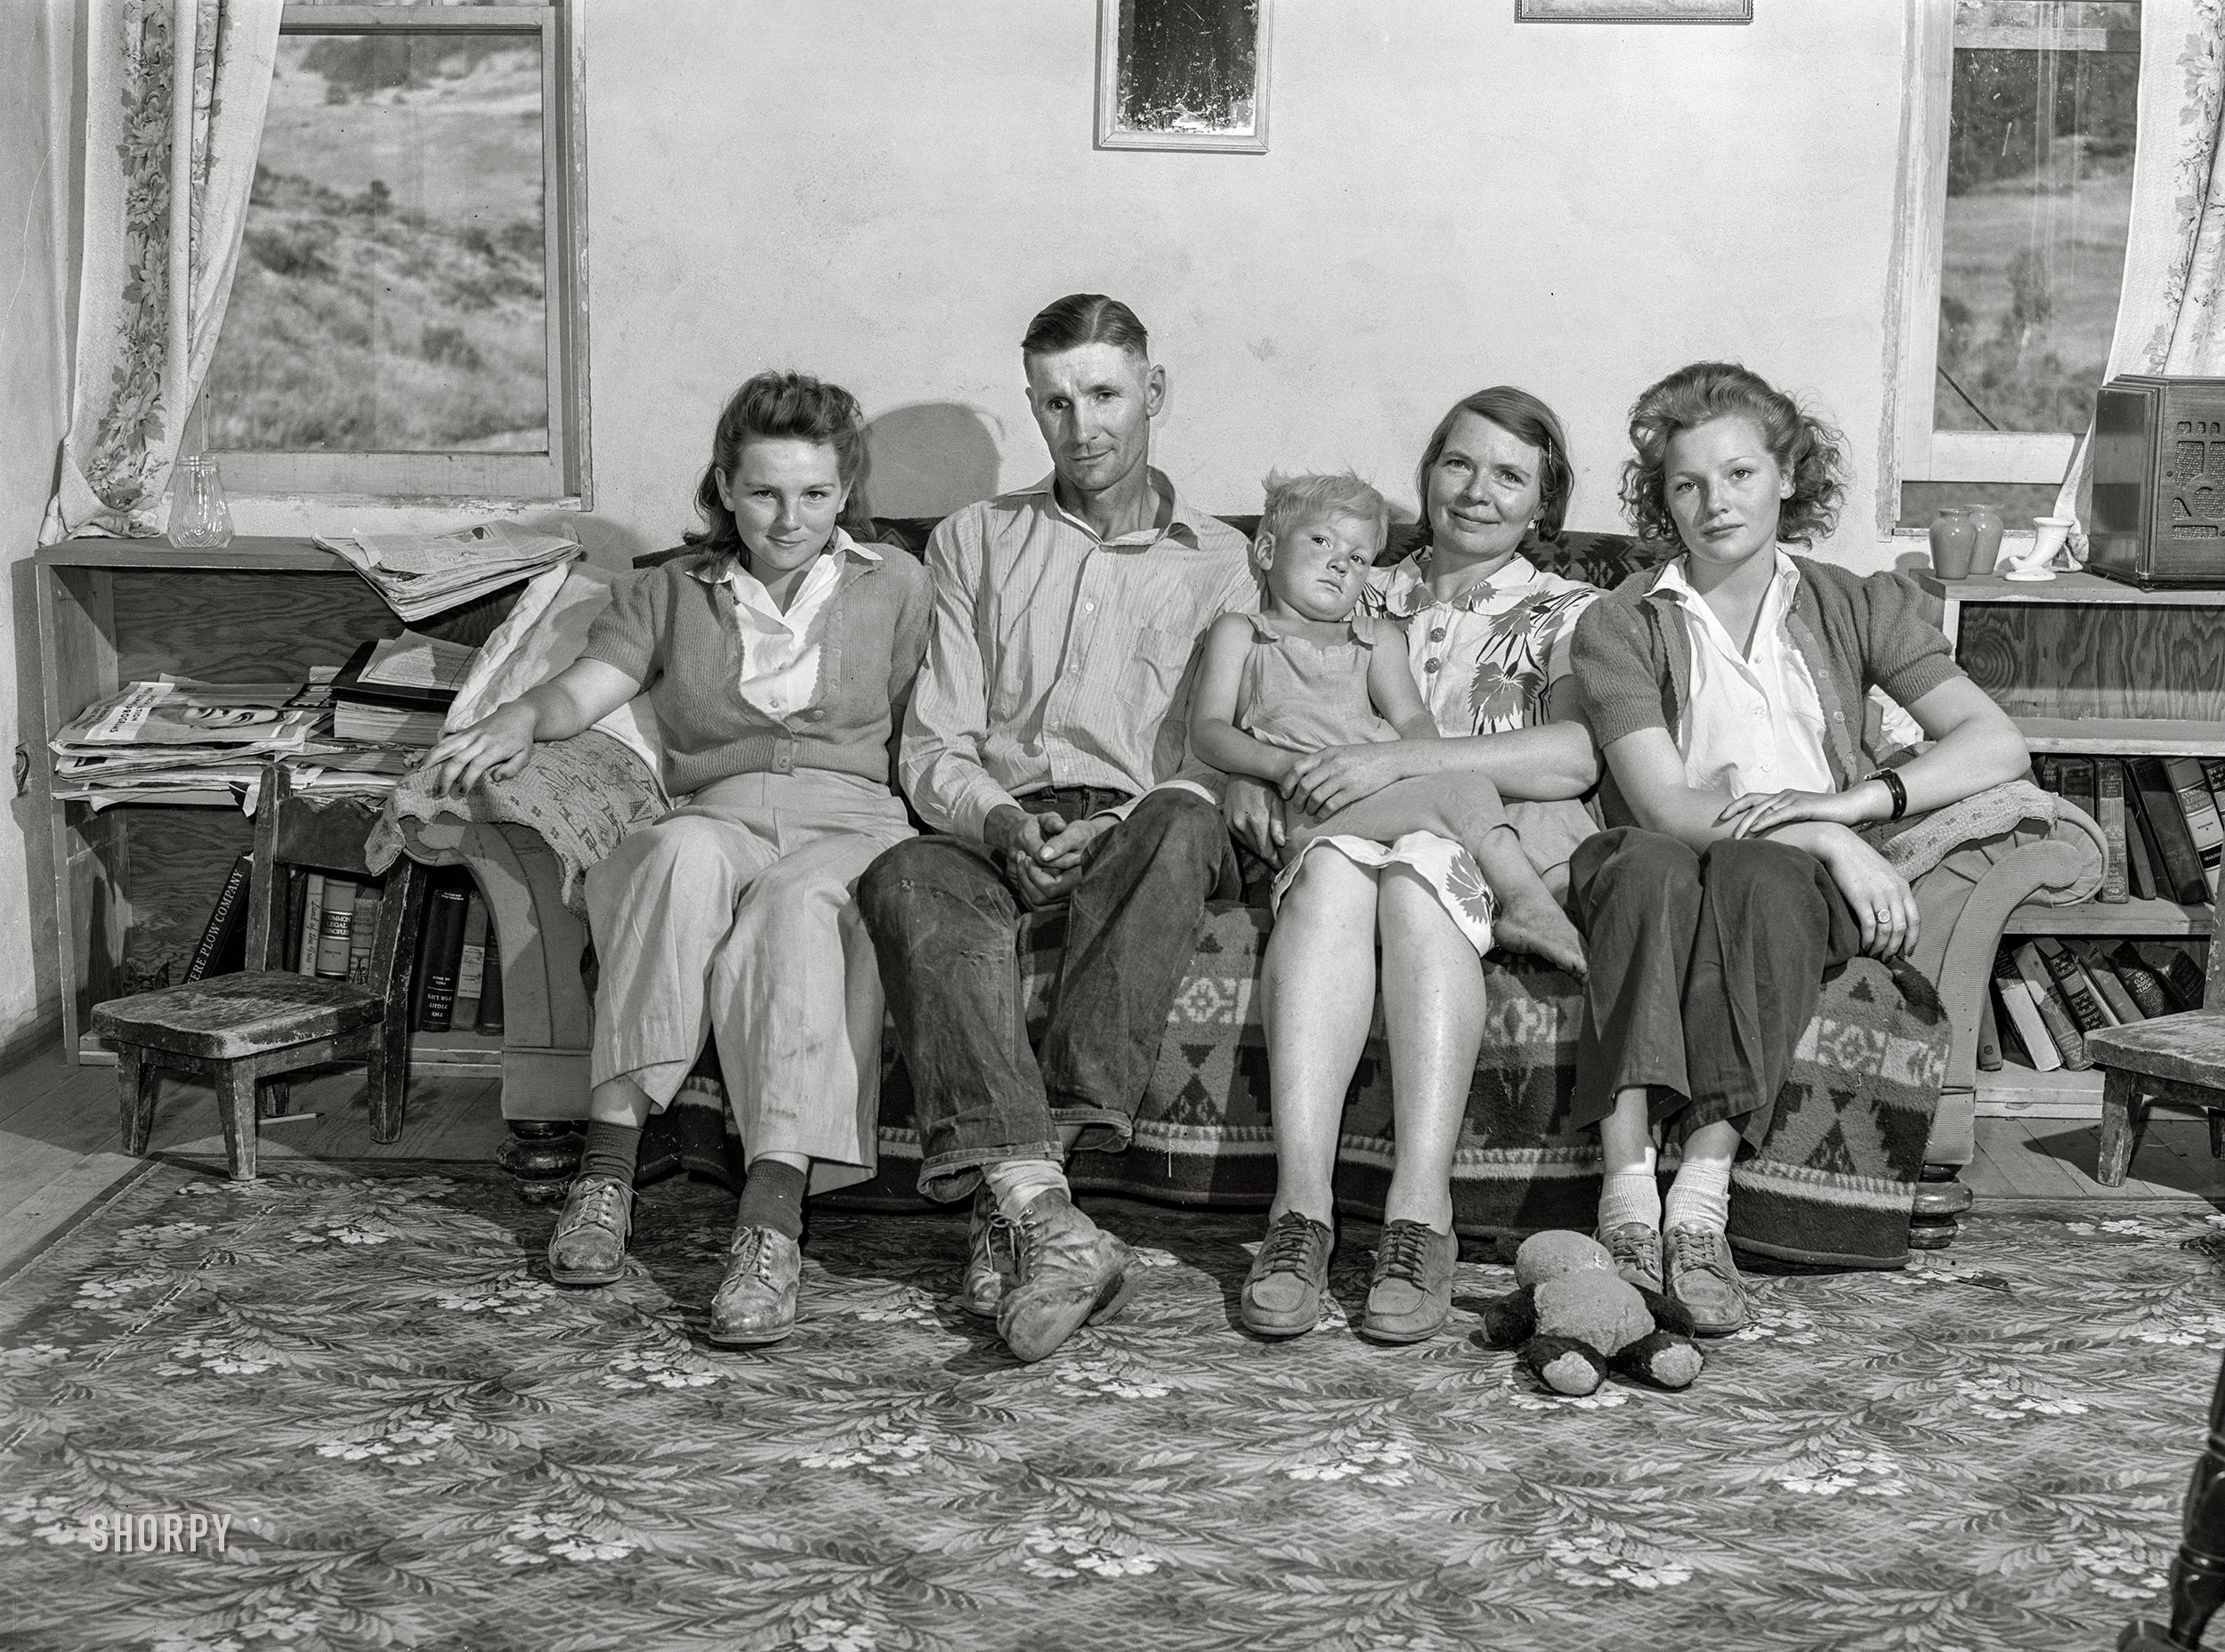 July 1942. "Ola, Idaho. FSA Ola self-help cooperative, adjacent timber stand, sawmill and farms. A member of the cooperative and his family at home. This man is a county commissioner." Photo by Russell Lee for the Farm Security Administration. View full size.